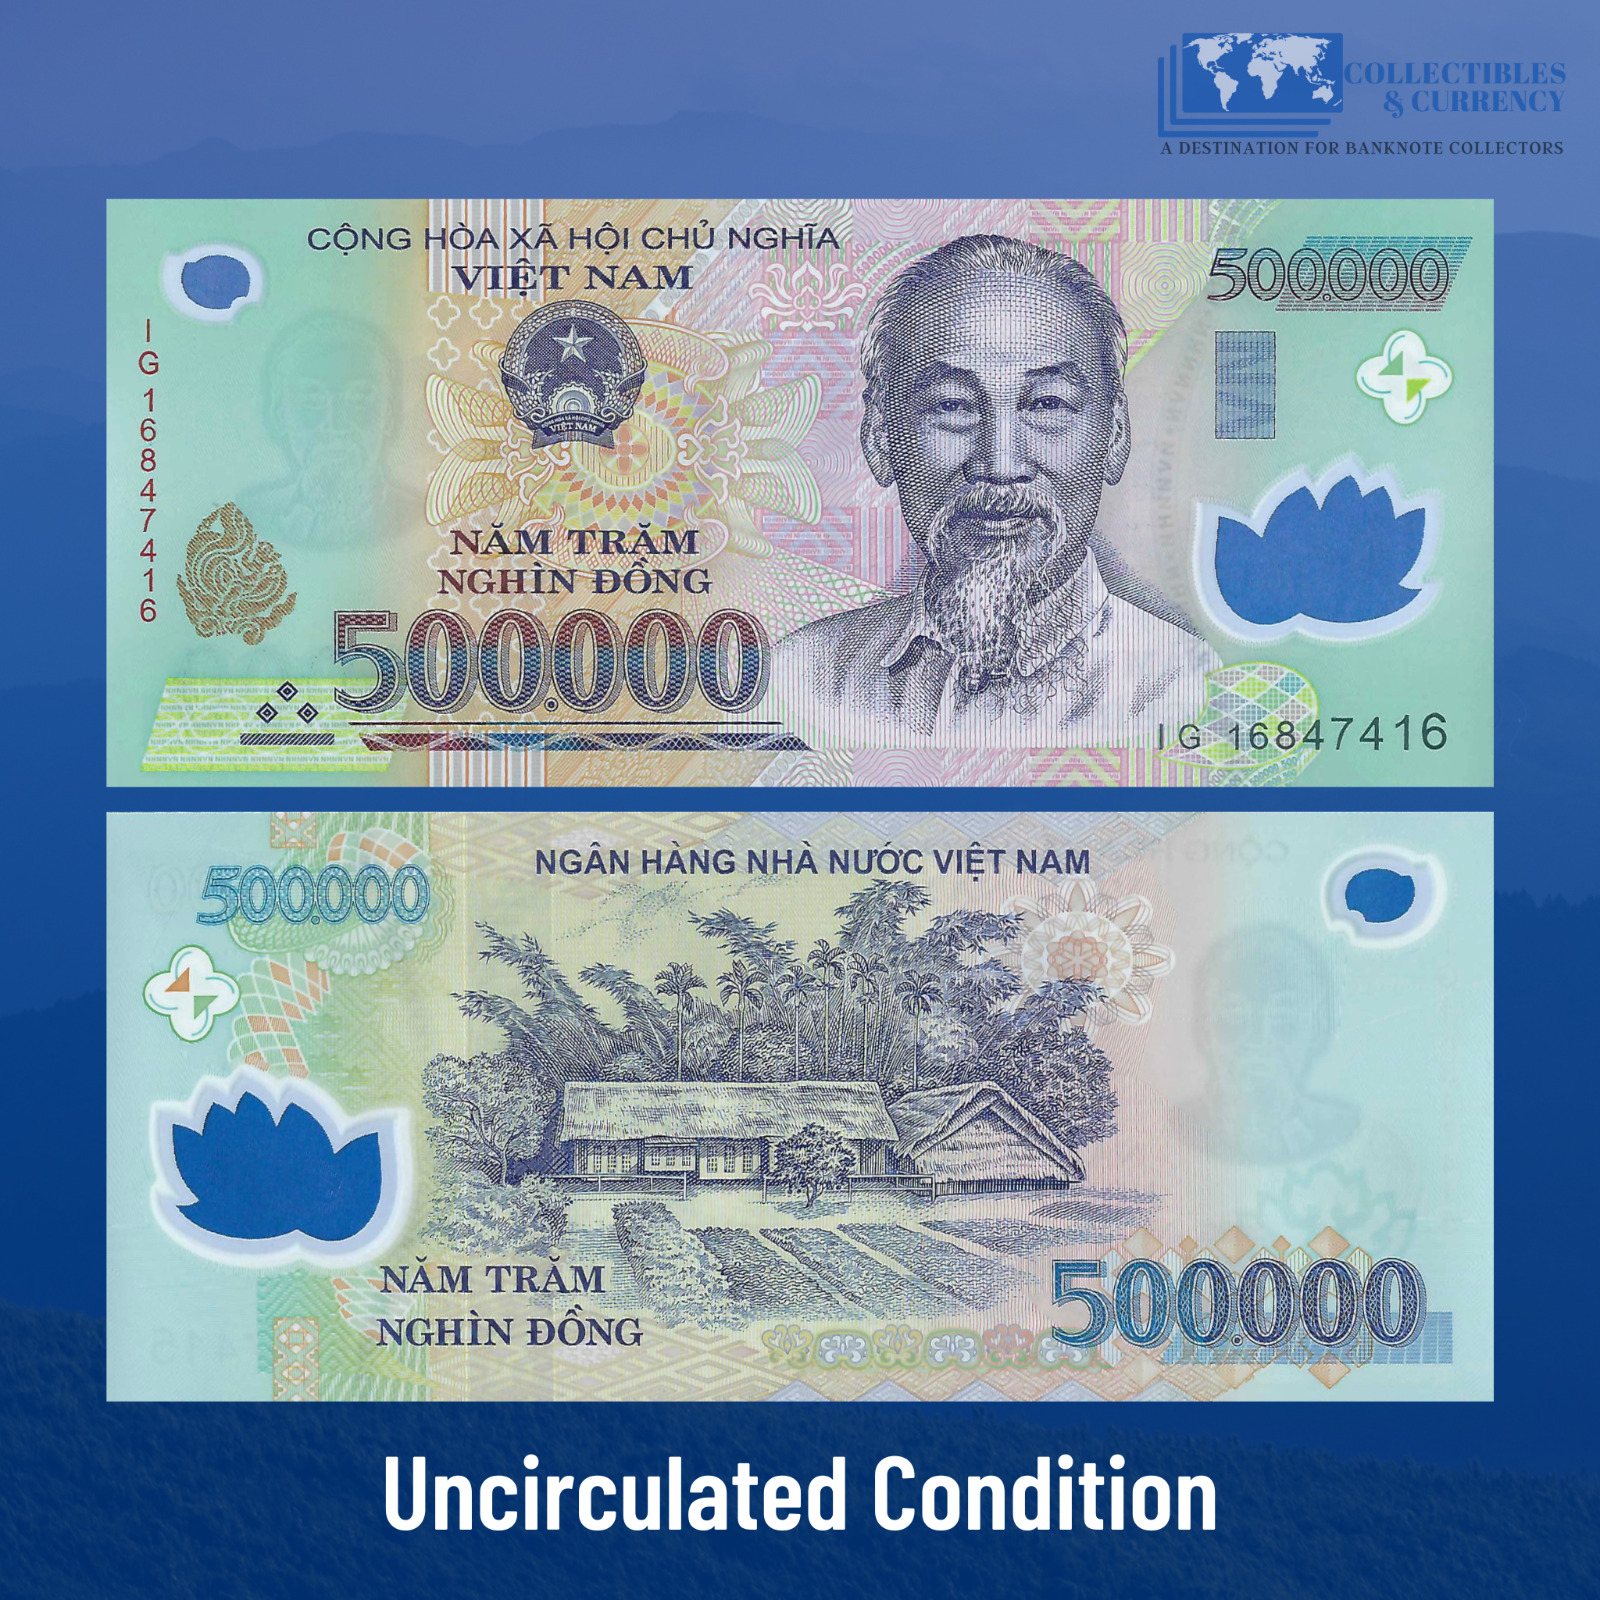 BUY 1 MILLION VIETNAM DONG = 2 x 500 000 Vietnamese Dong Currency - VND Banknote